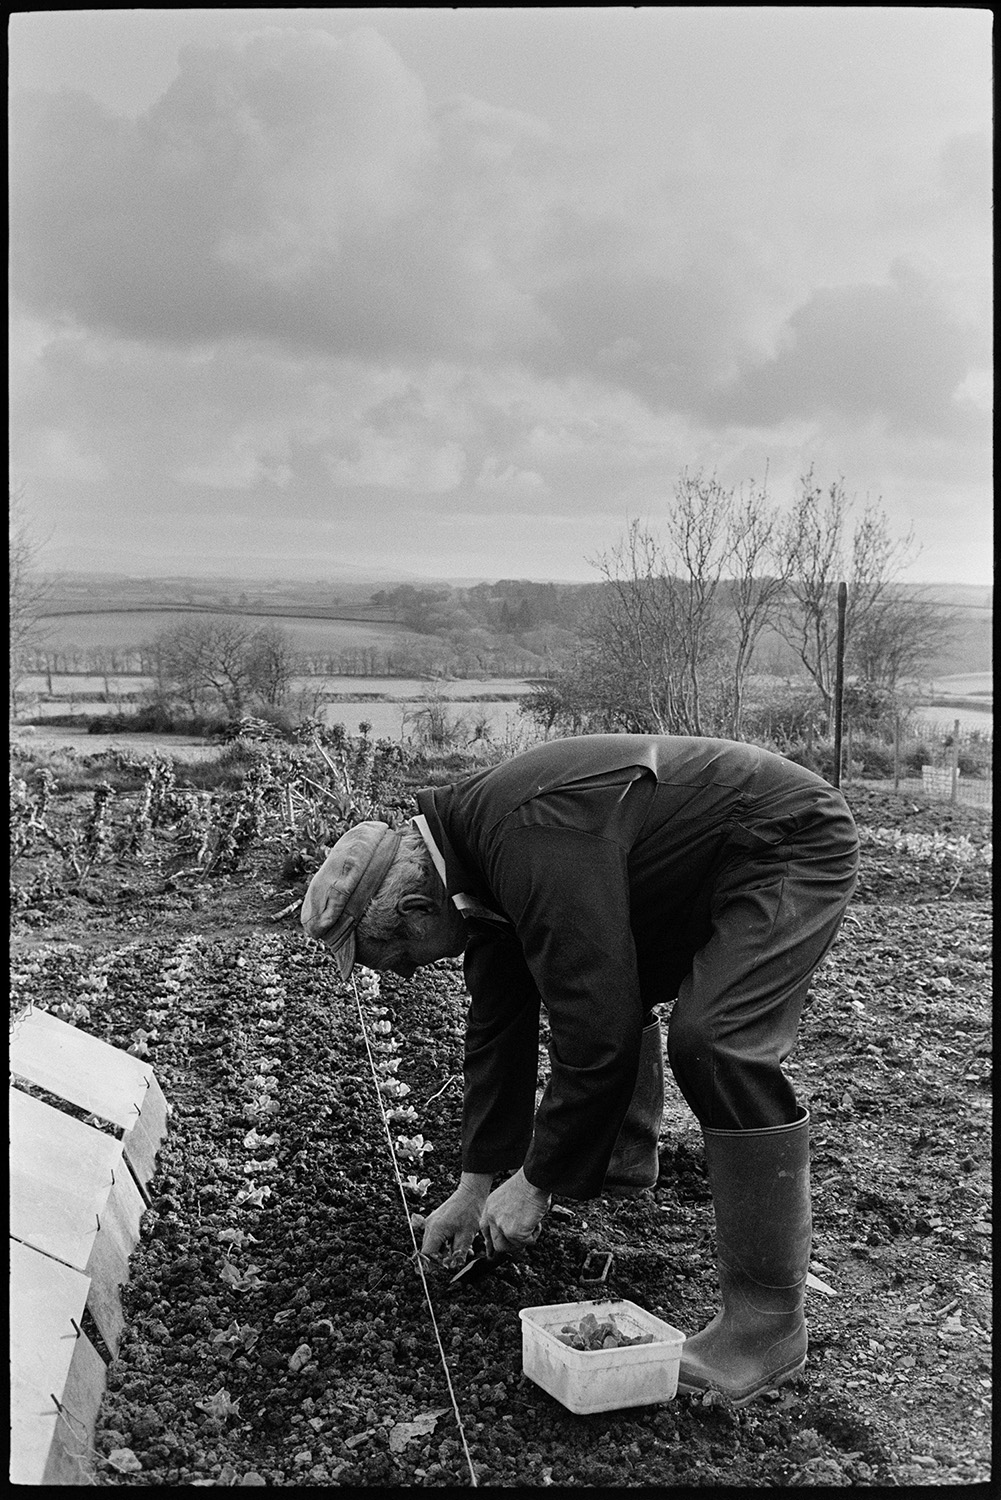 Man planting out vegetable garden. 
[A man planting seedlings in his vegetable garden at Iddesleigh. Cloches have been placed over some of the young plants.]